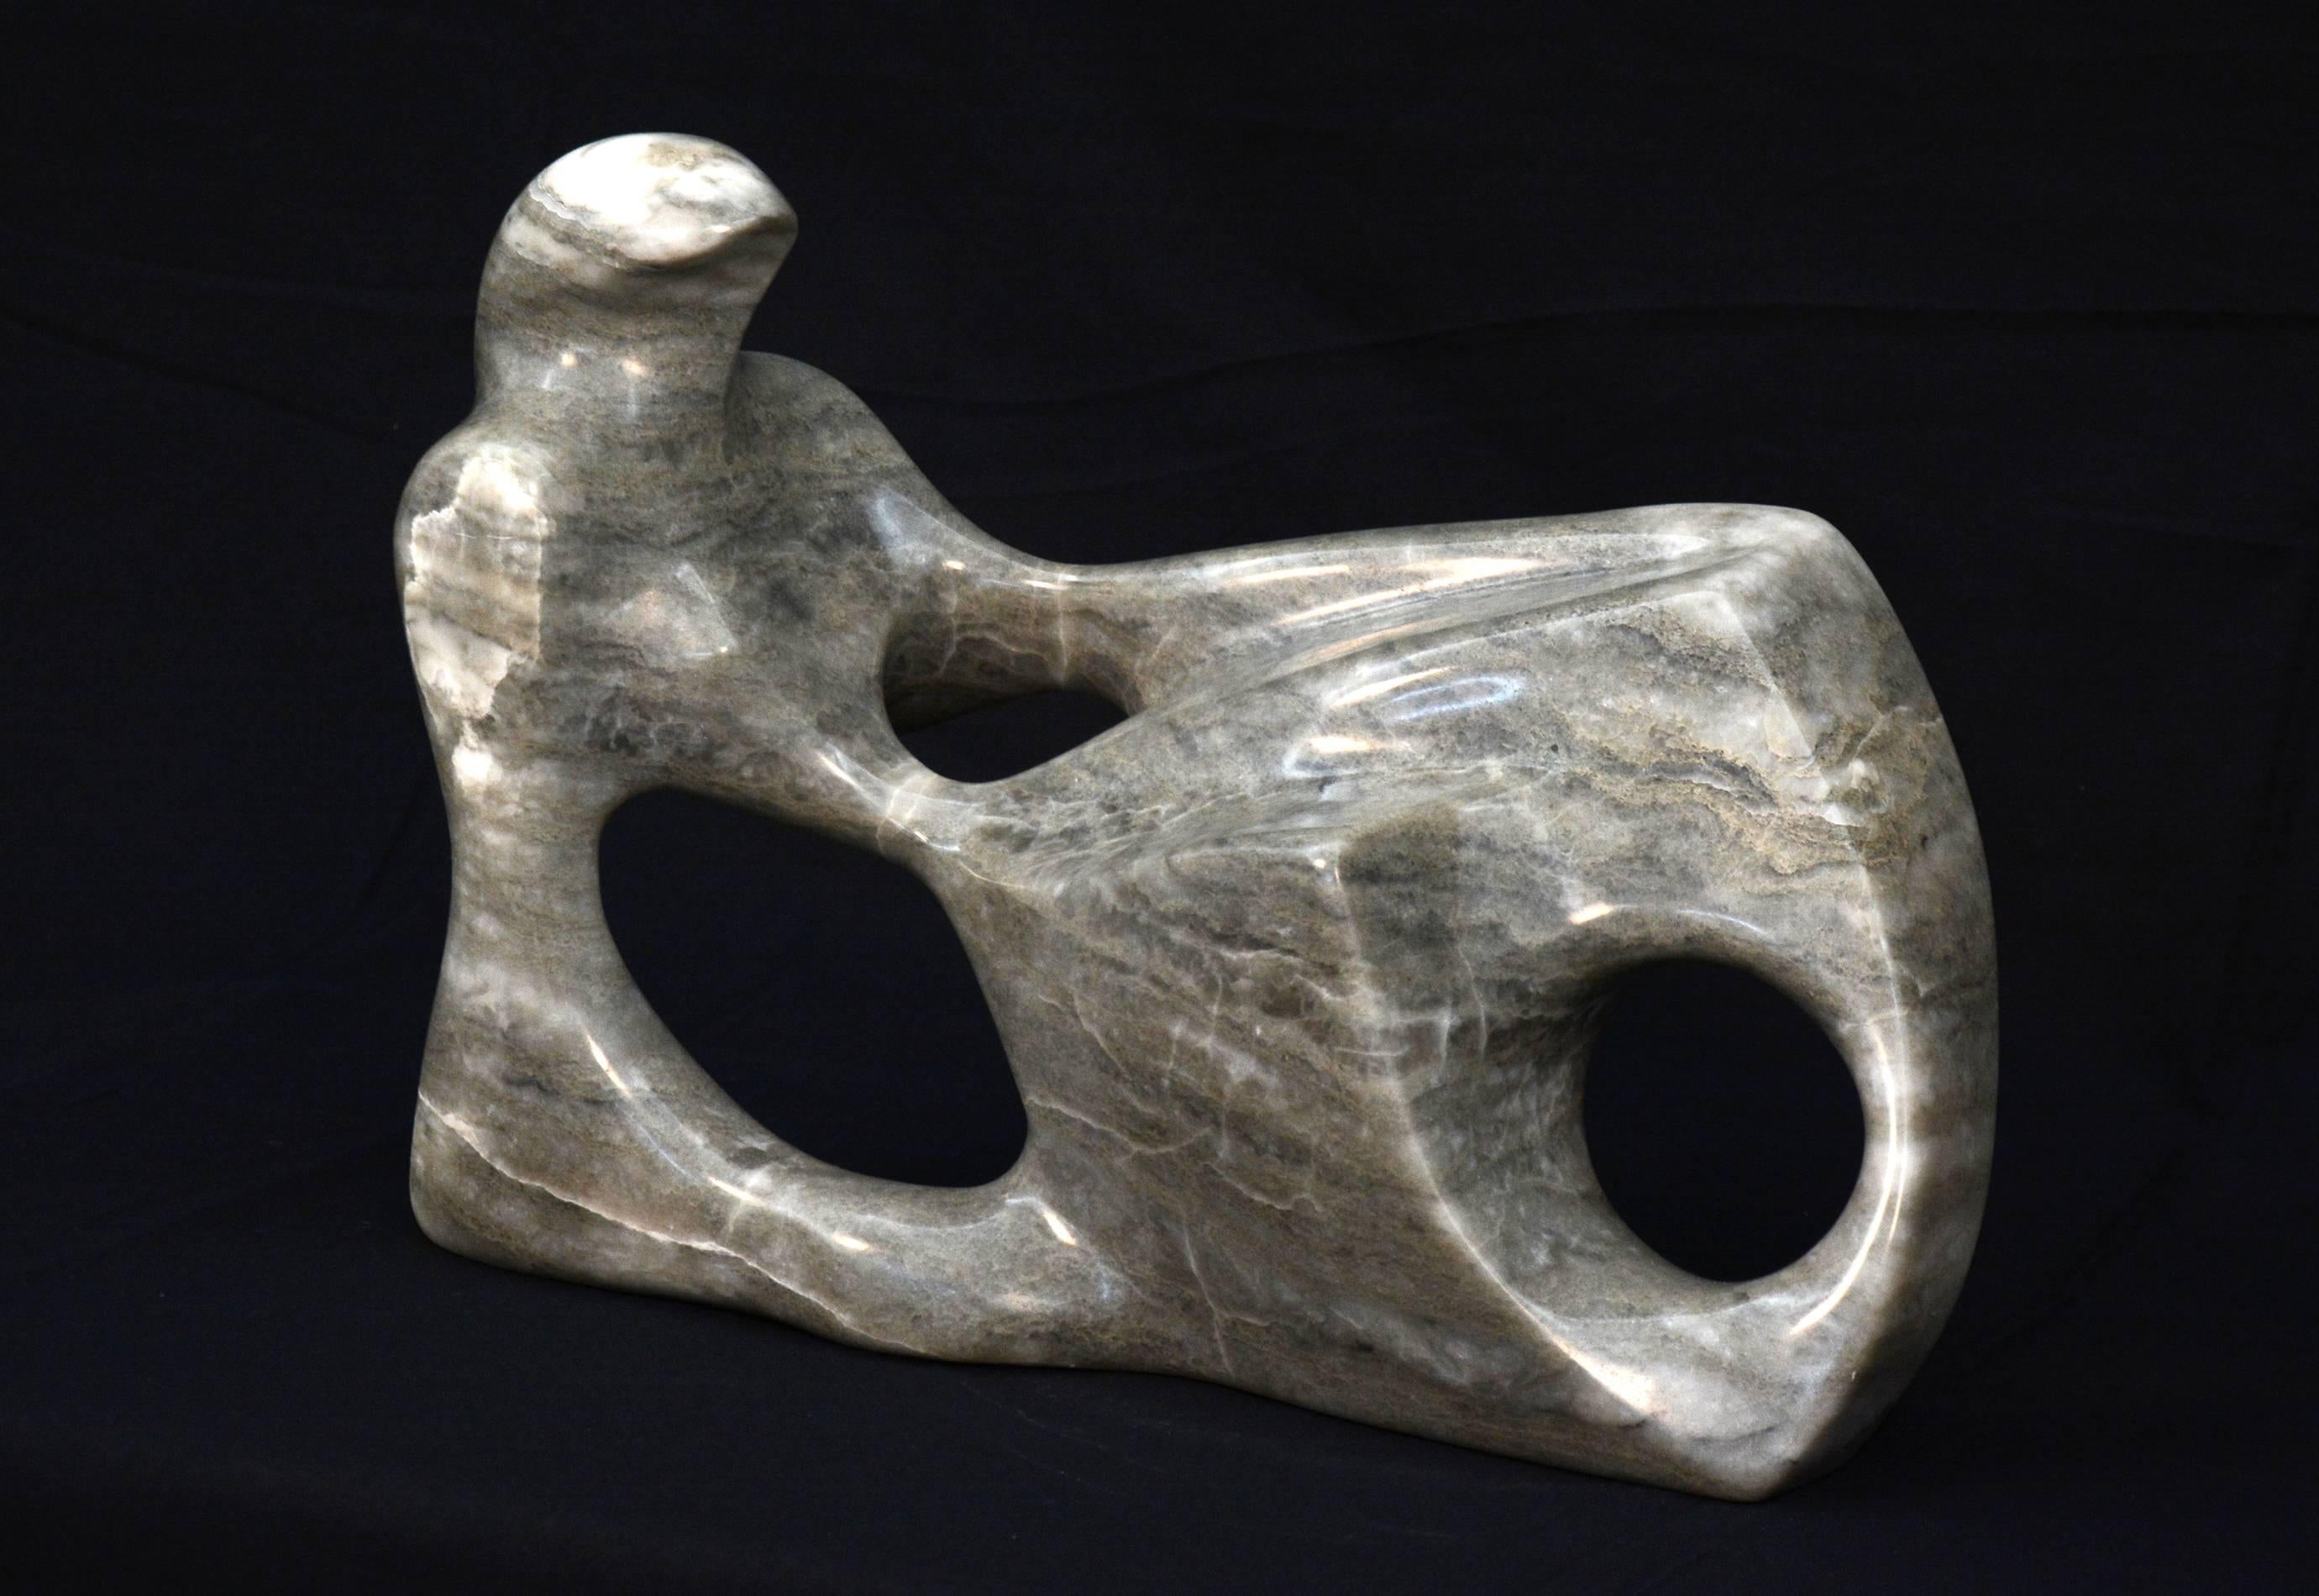 Reclining Figure Alabaster - smooth, stone, figurative, tabletop sculpture - Sculpture by Jeremy Guy